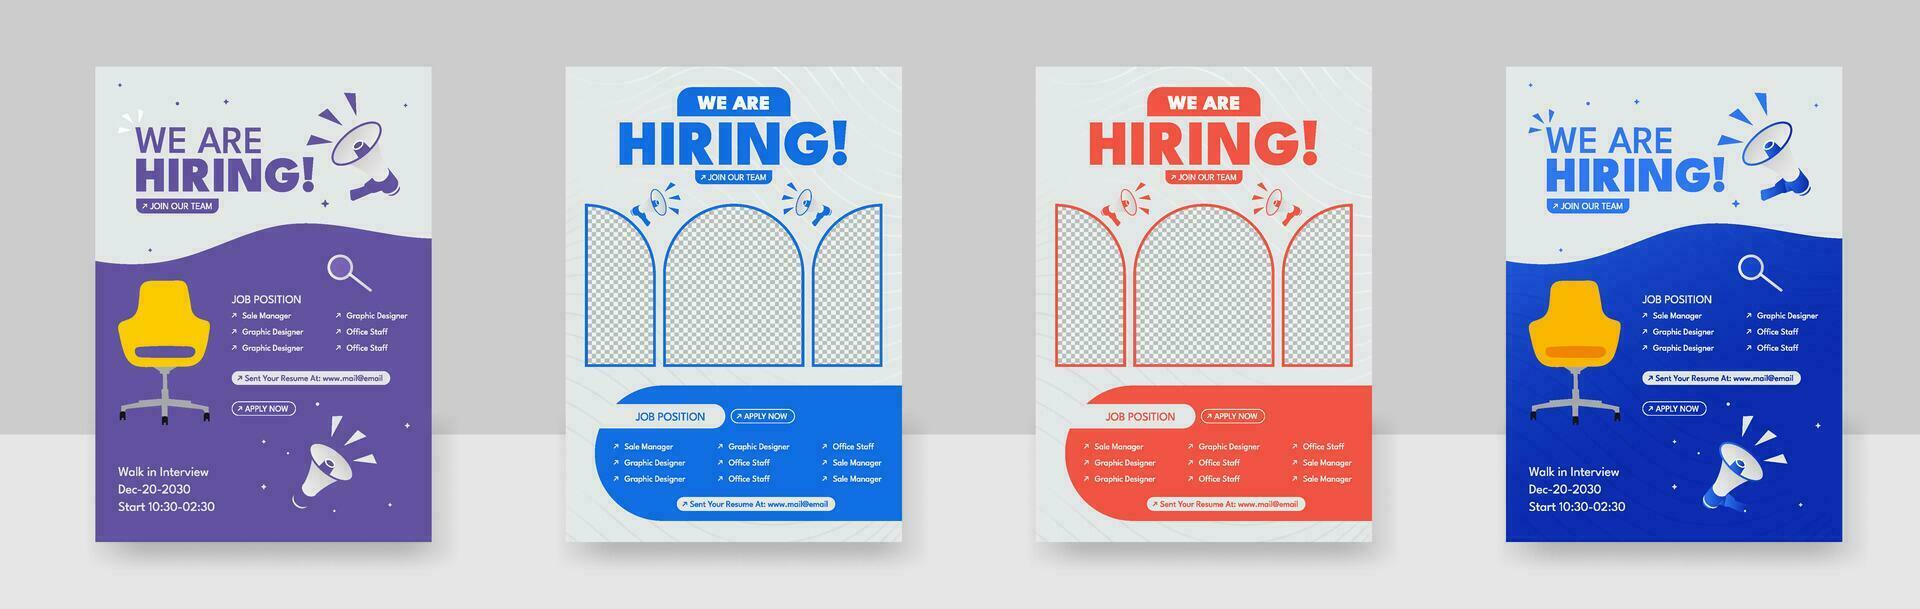 hiring Job offer leaflet template. looking for new members of our team vector